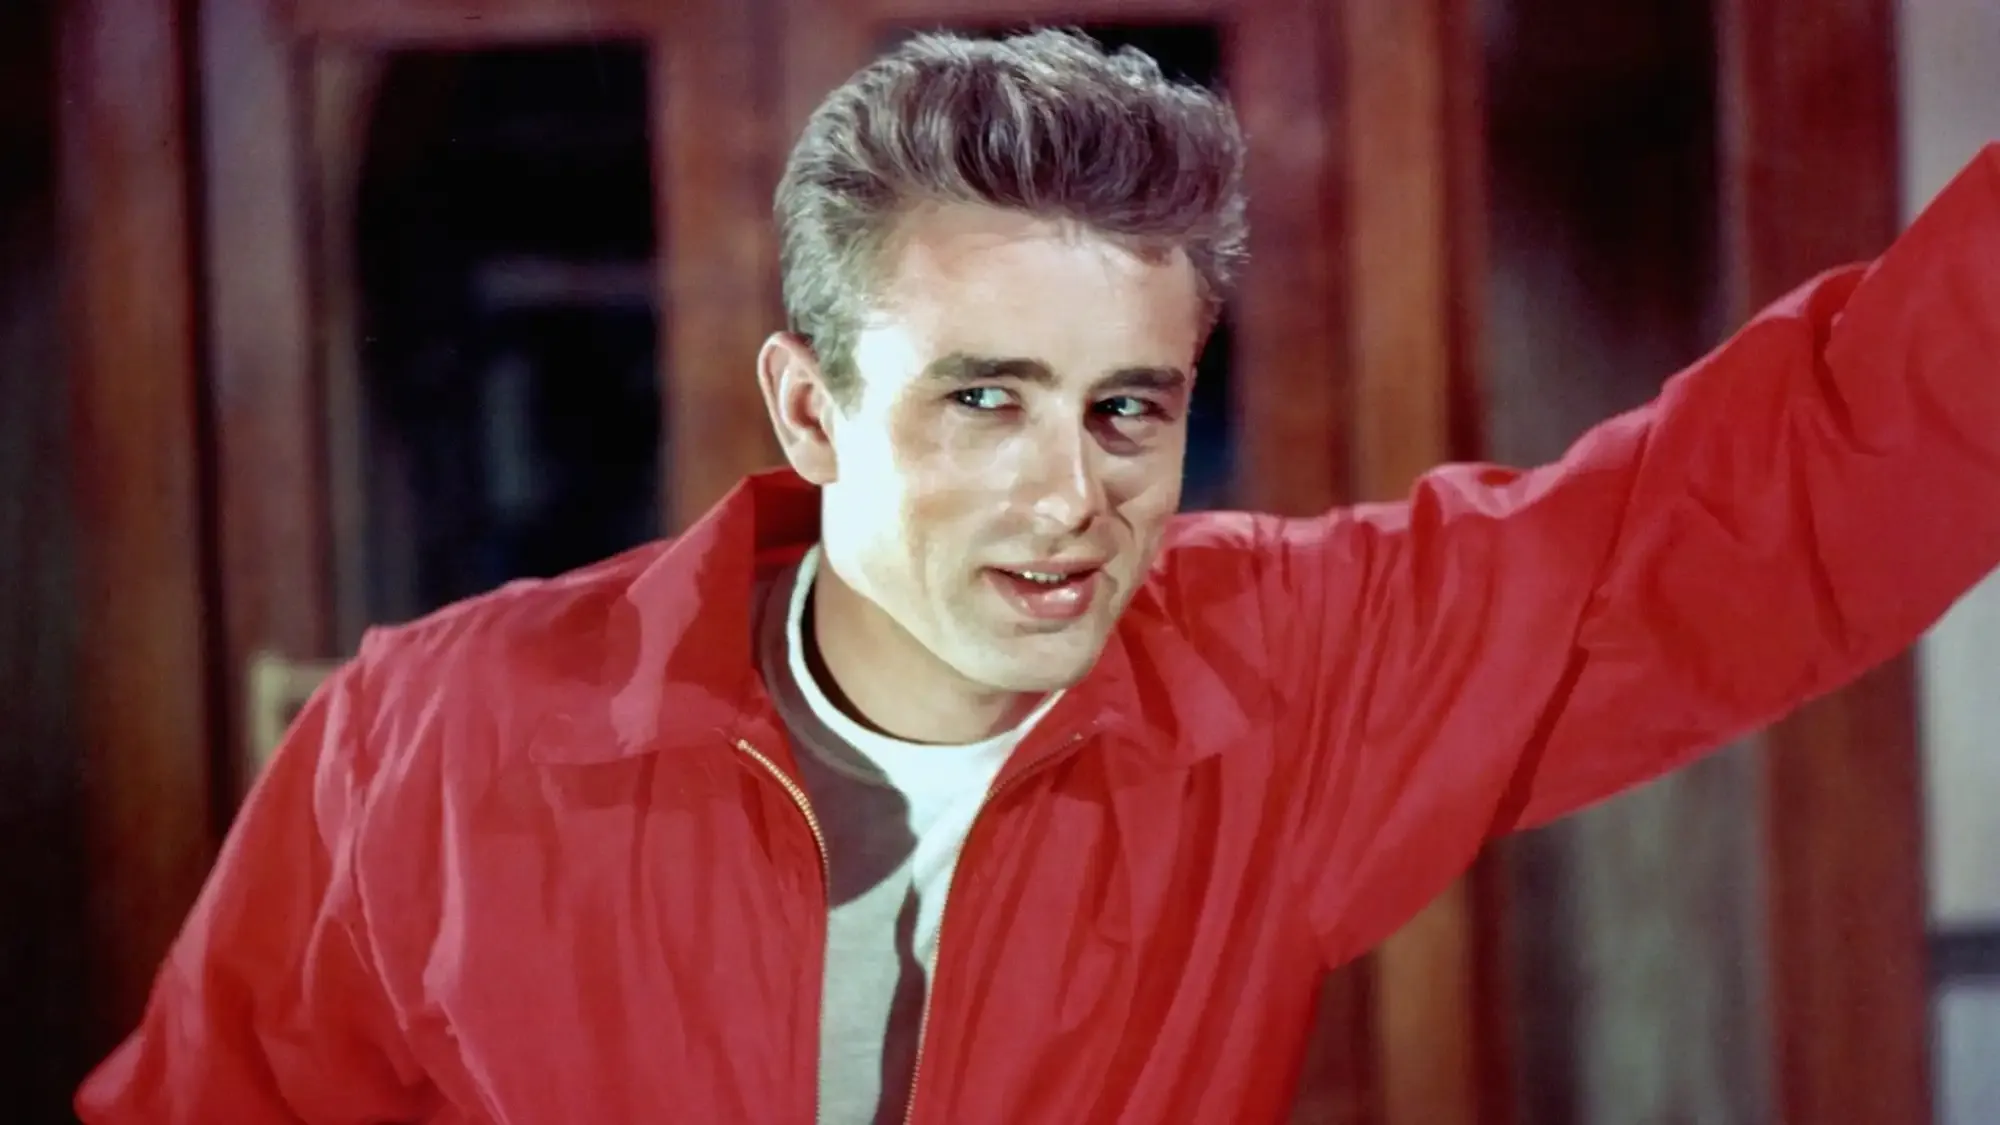 Rebel Without a Cause movie review